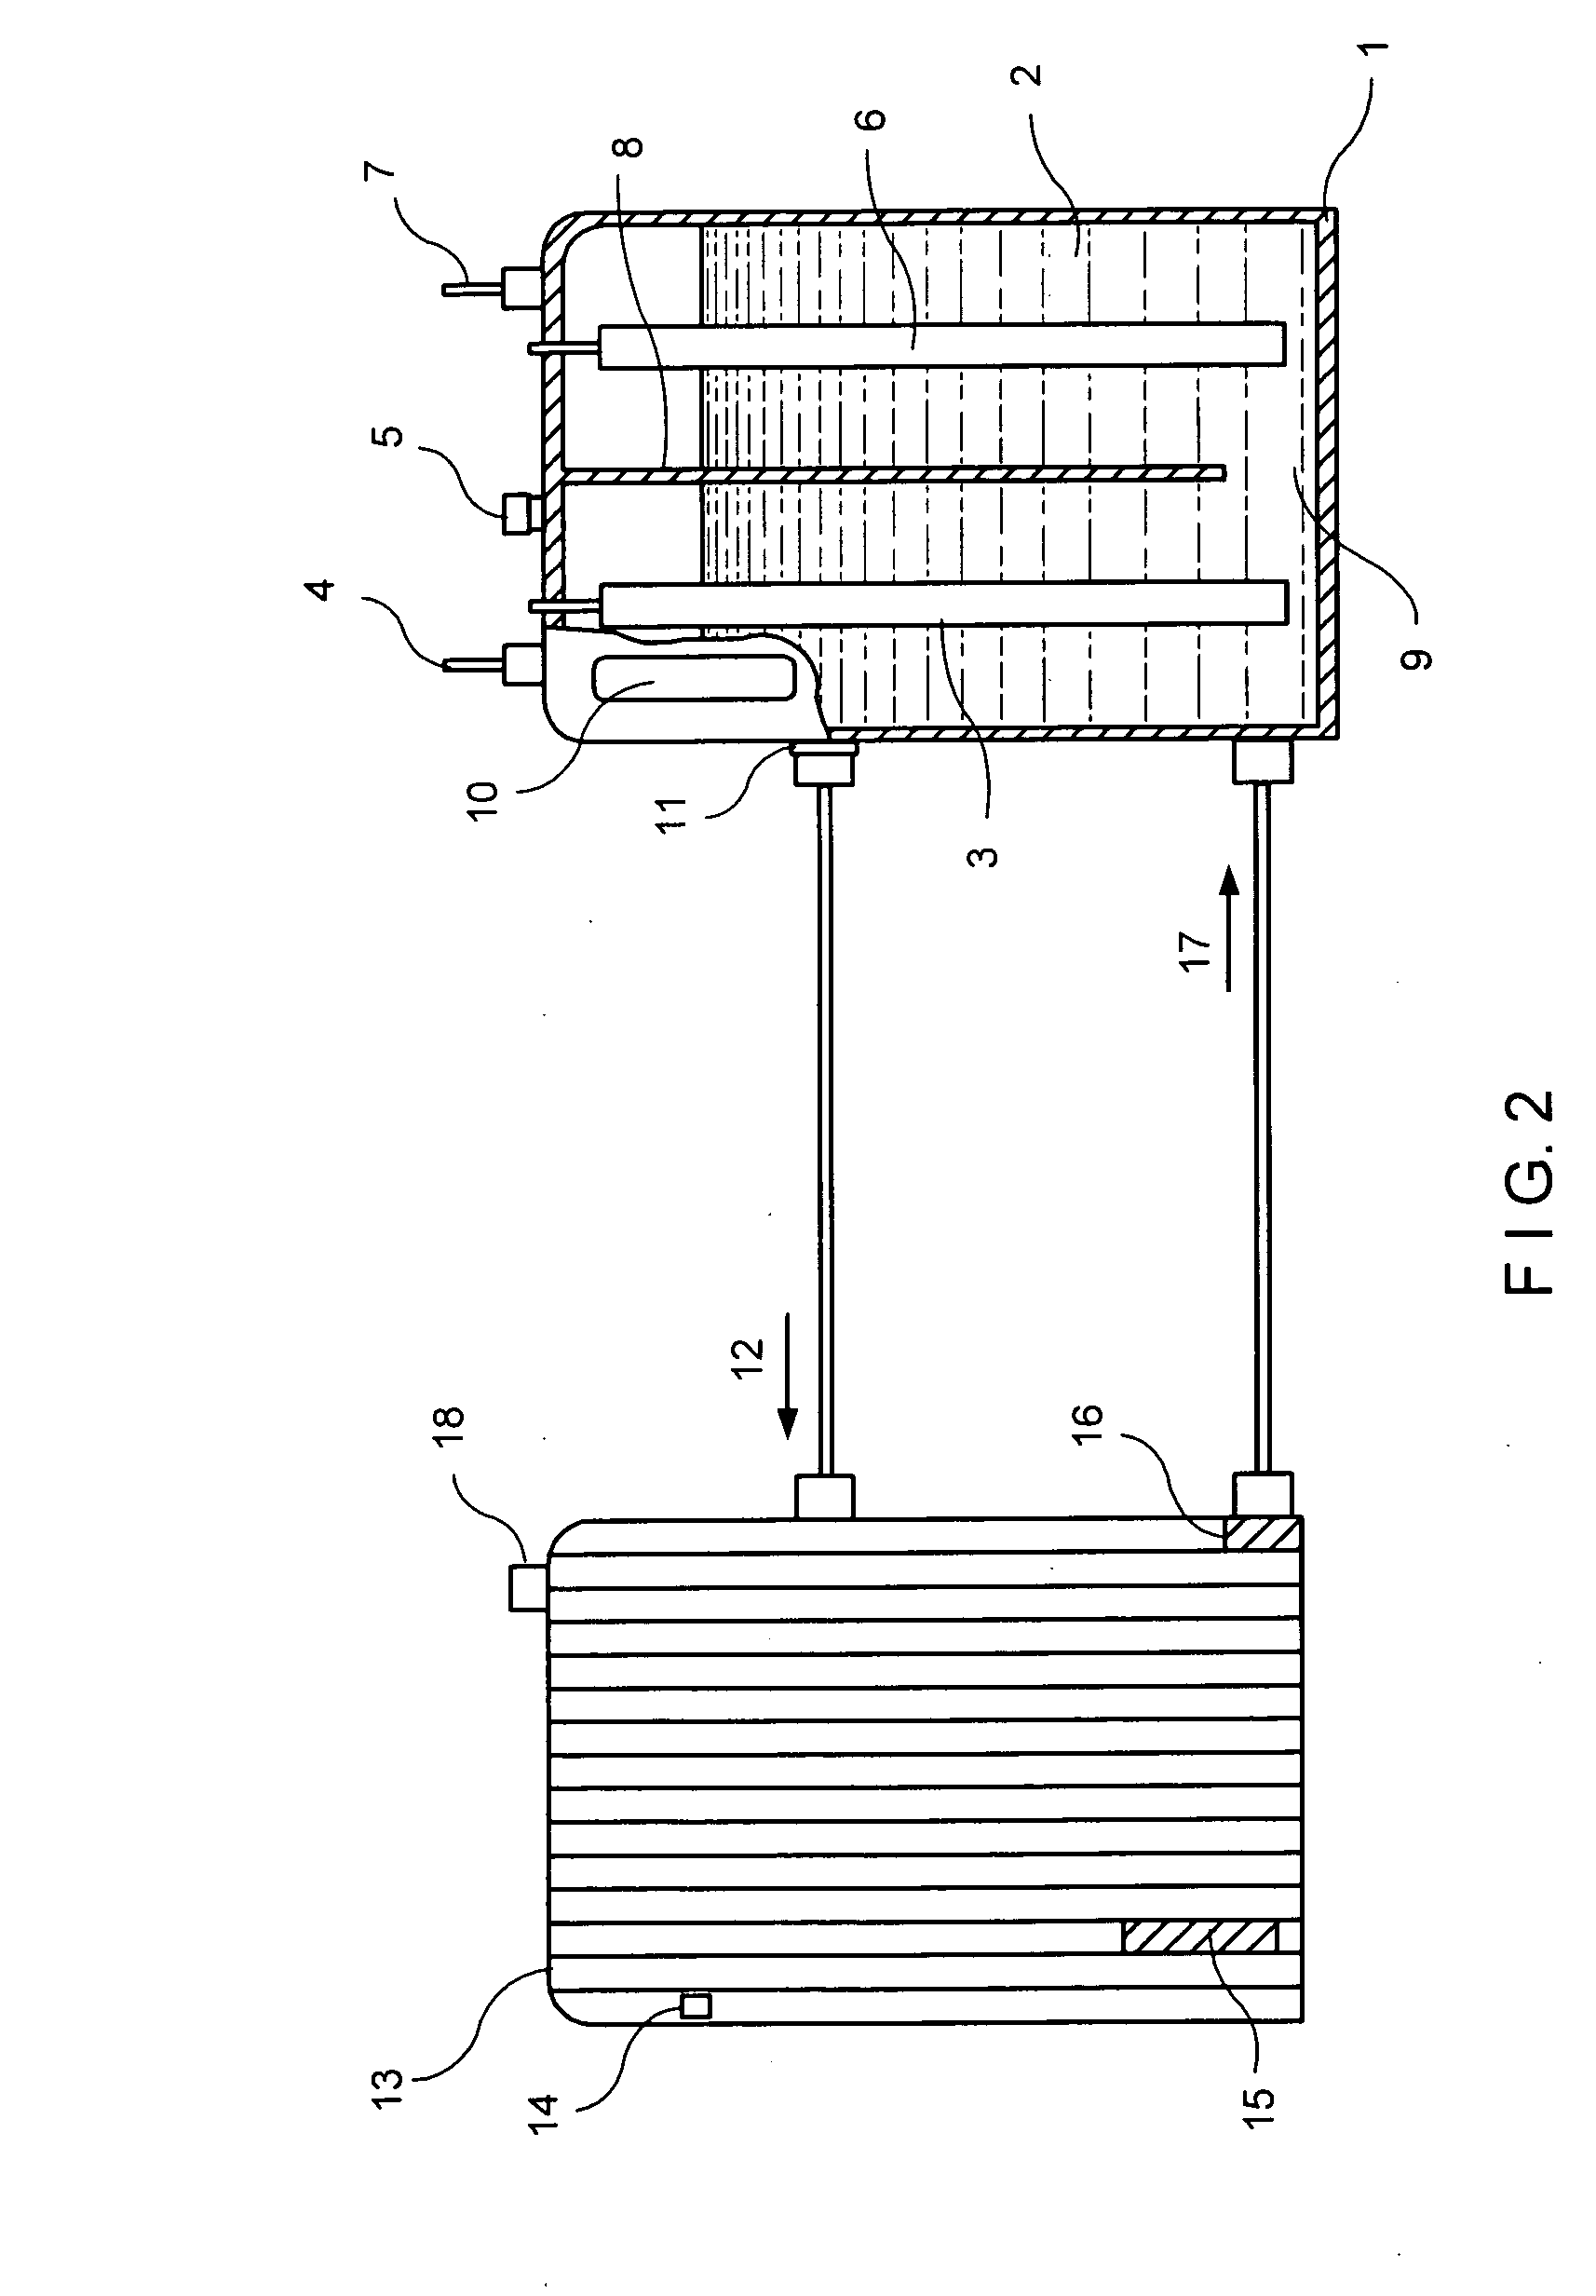 Enhanced device for generating hydrogen for use in internal combustion engines